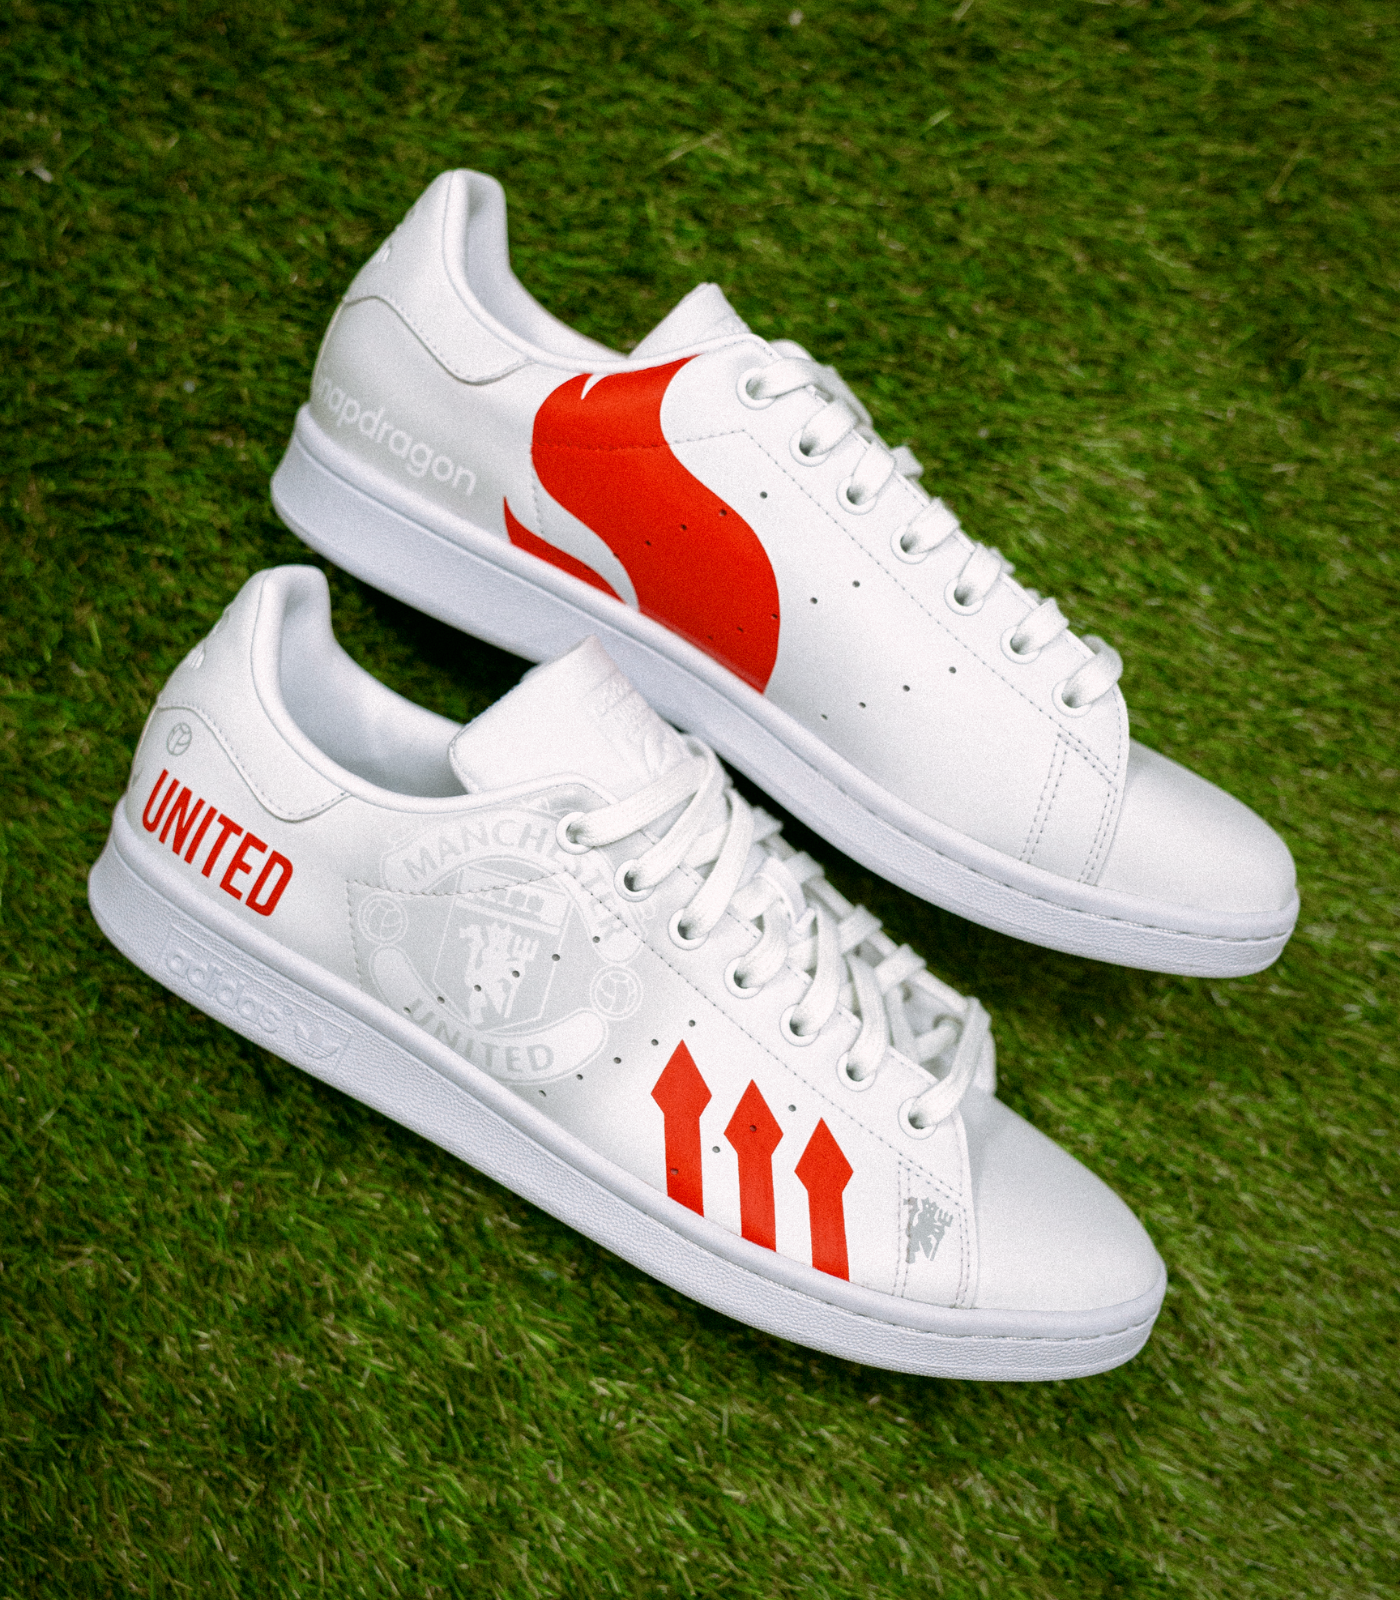 Manchester United x Snapdragon Stan Smiths